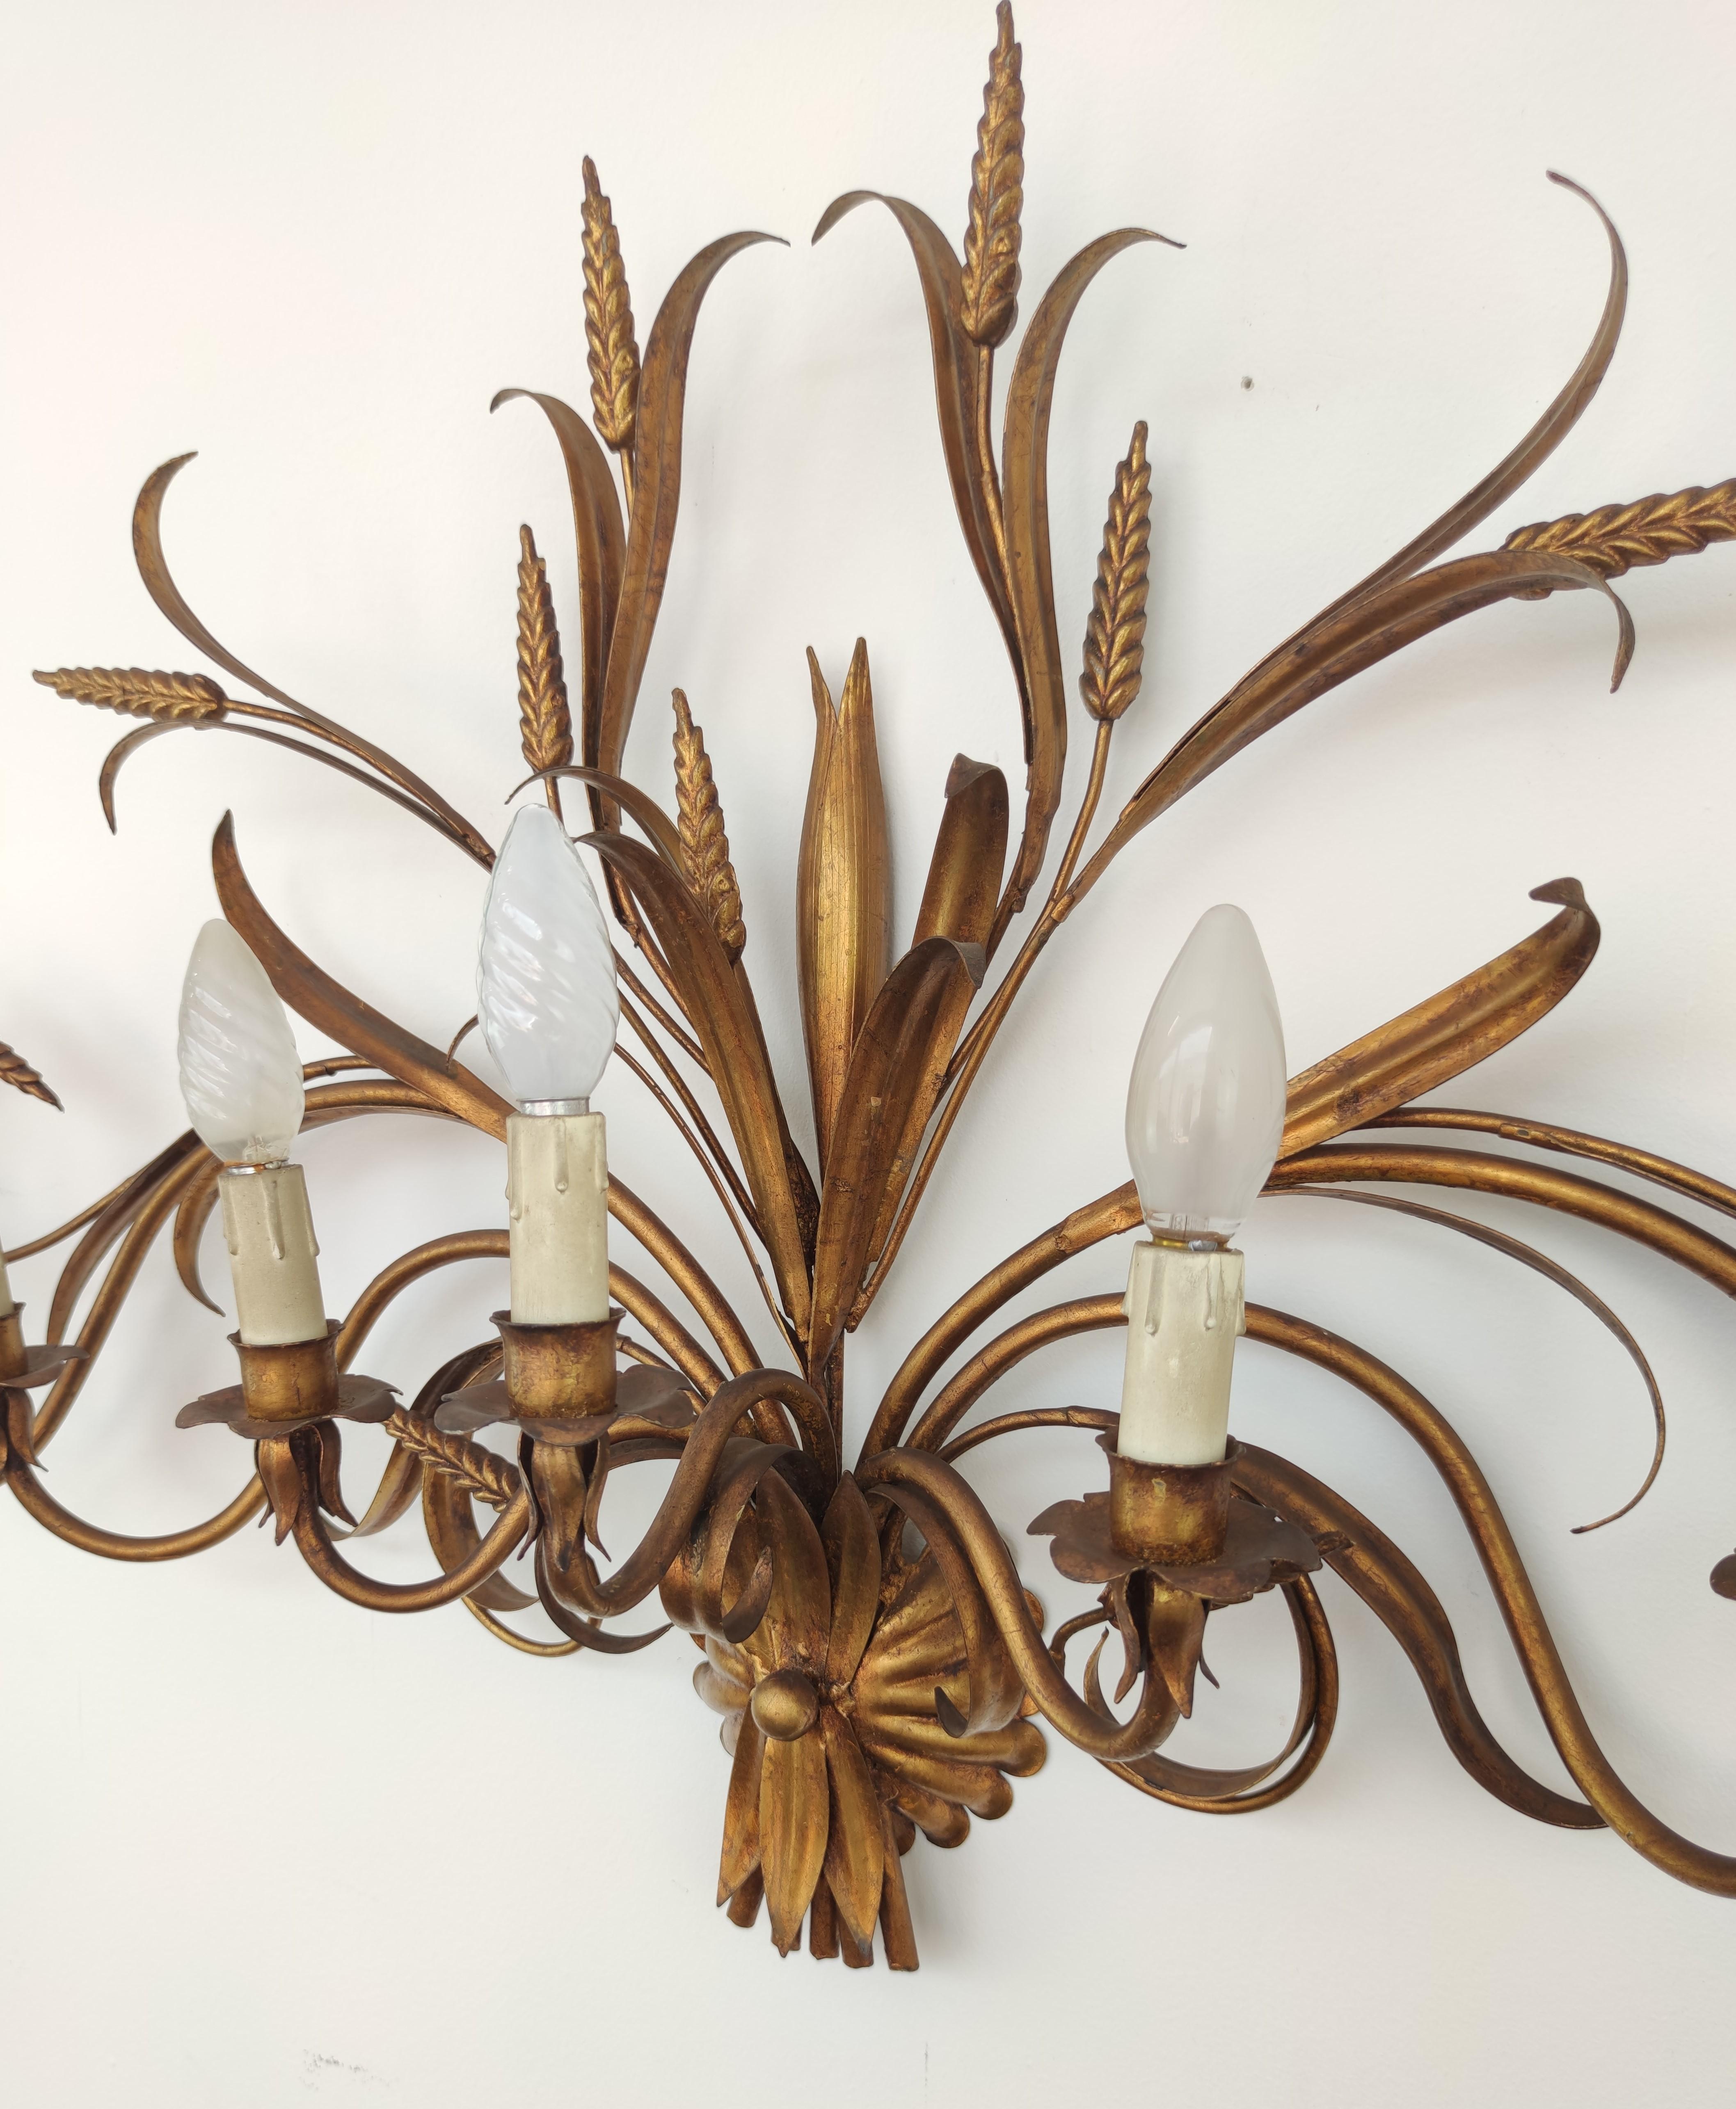 20th Century Italian or French Mid-Century Gilt Toleware Wheat Sheaf Wall Light For Sale